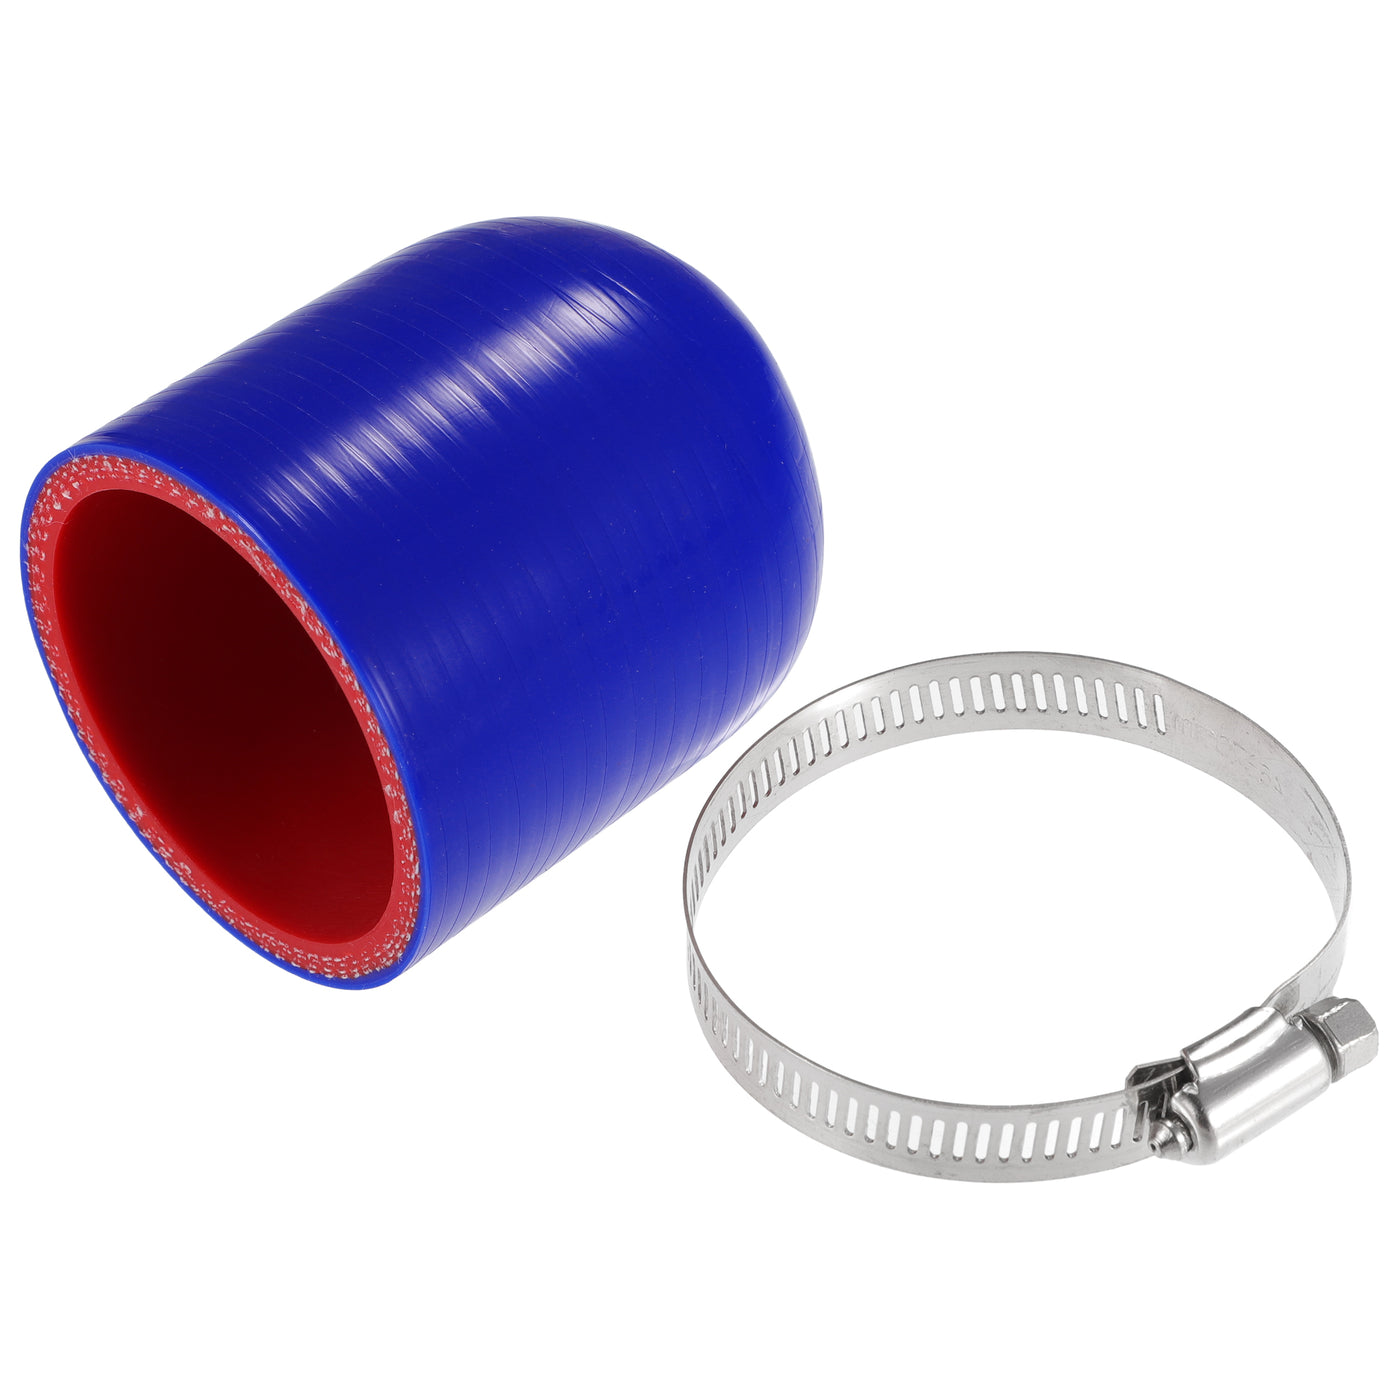 Partuto 1 Set 55mm 2.17" ID Universal Silicone Hose Cap Intake Vacuum Hose End Plug - Car for Coolant Heater Bypass Vacuum Water Port - Silicone Blue Red